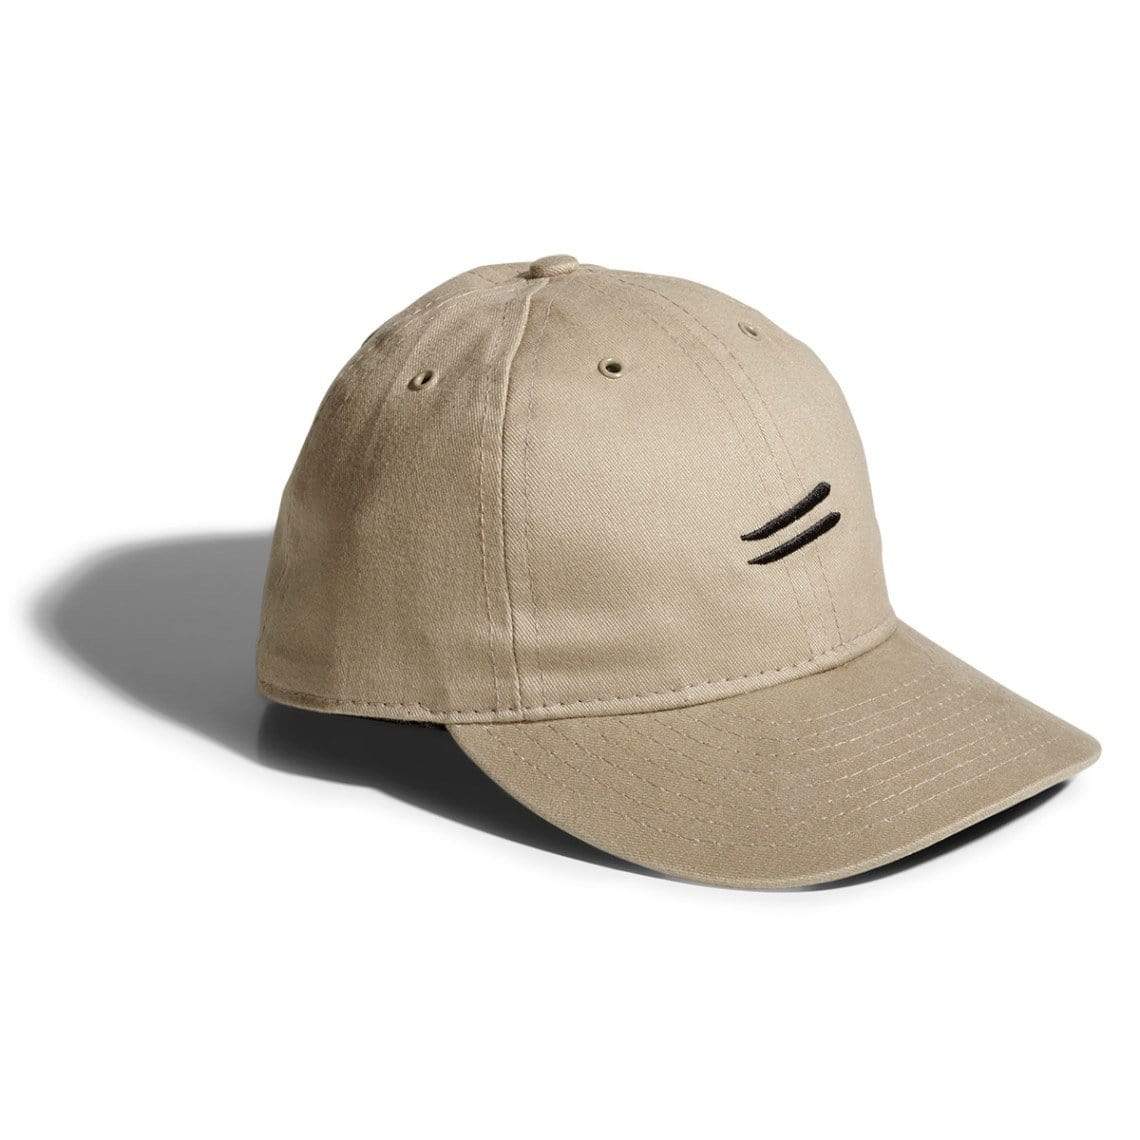 Wright Fitted brothers cap cotton twill Khaki flight